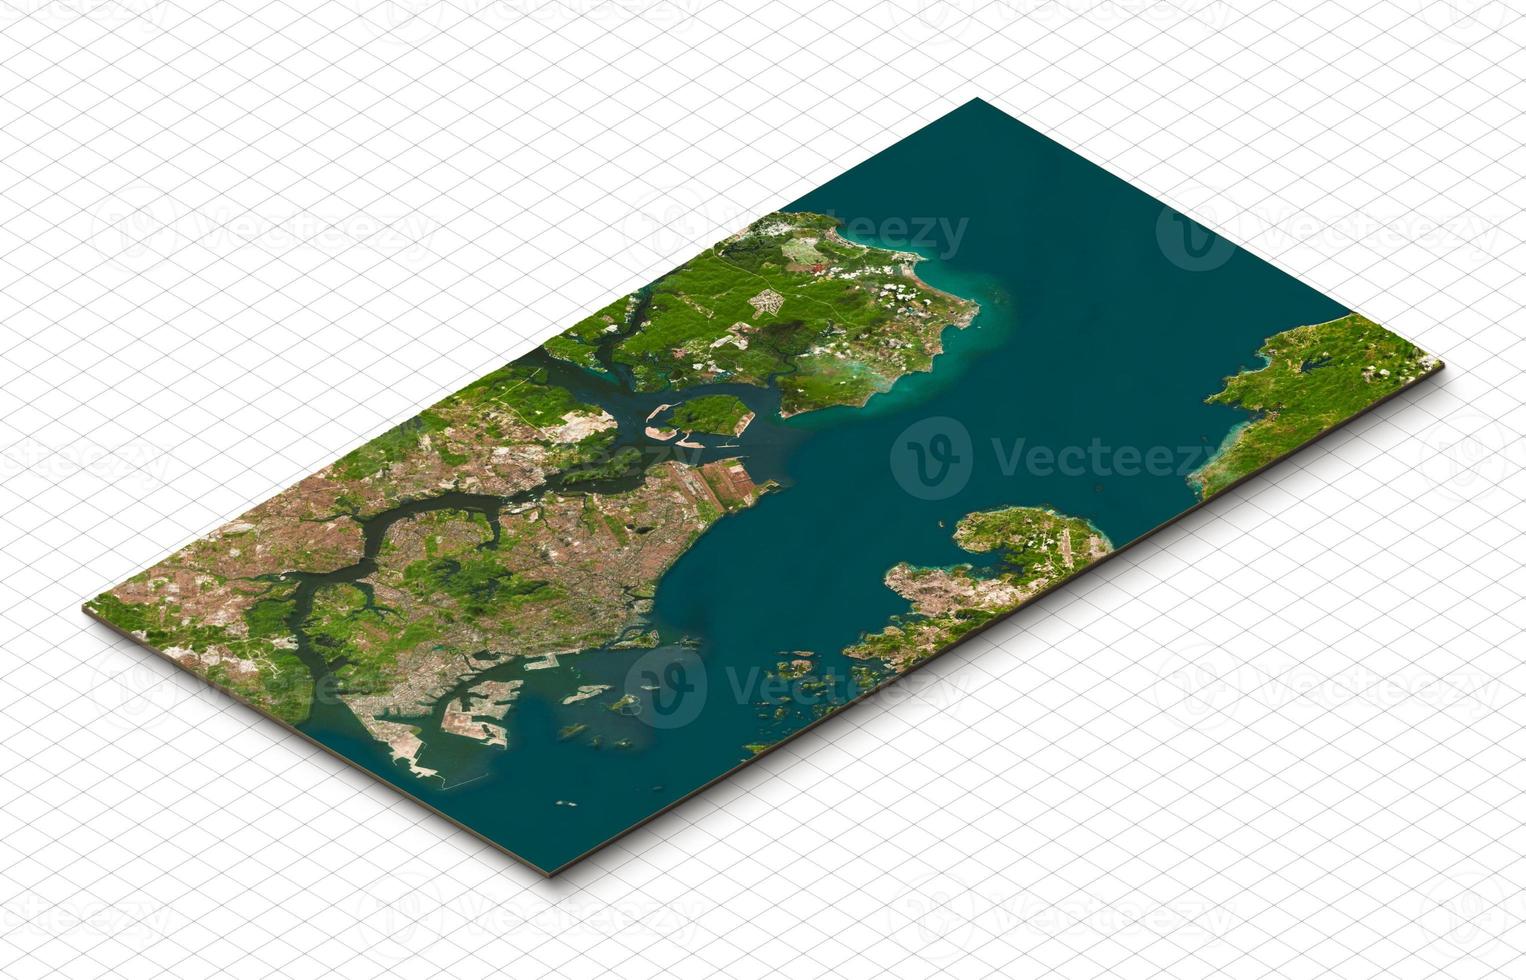 3d model of Singapore. Isometric map virtual terrain 3d for infographic. Geography and topography planet earth flattened satellite view photo